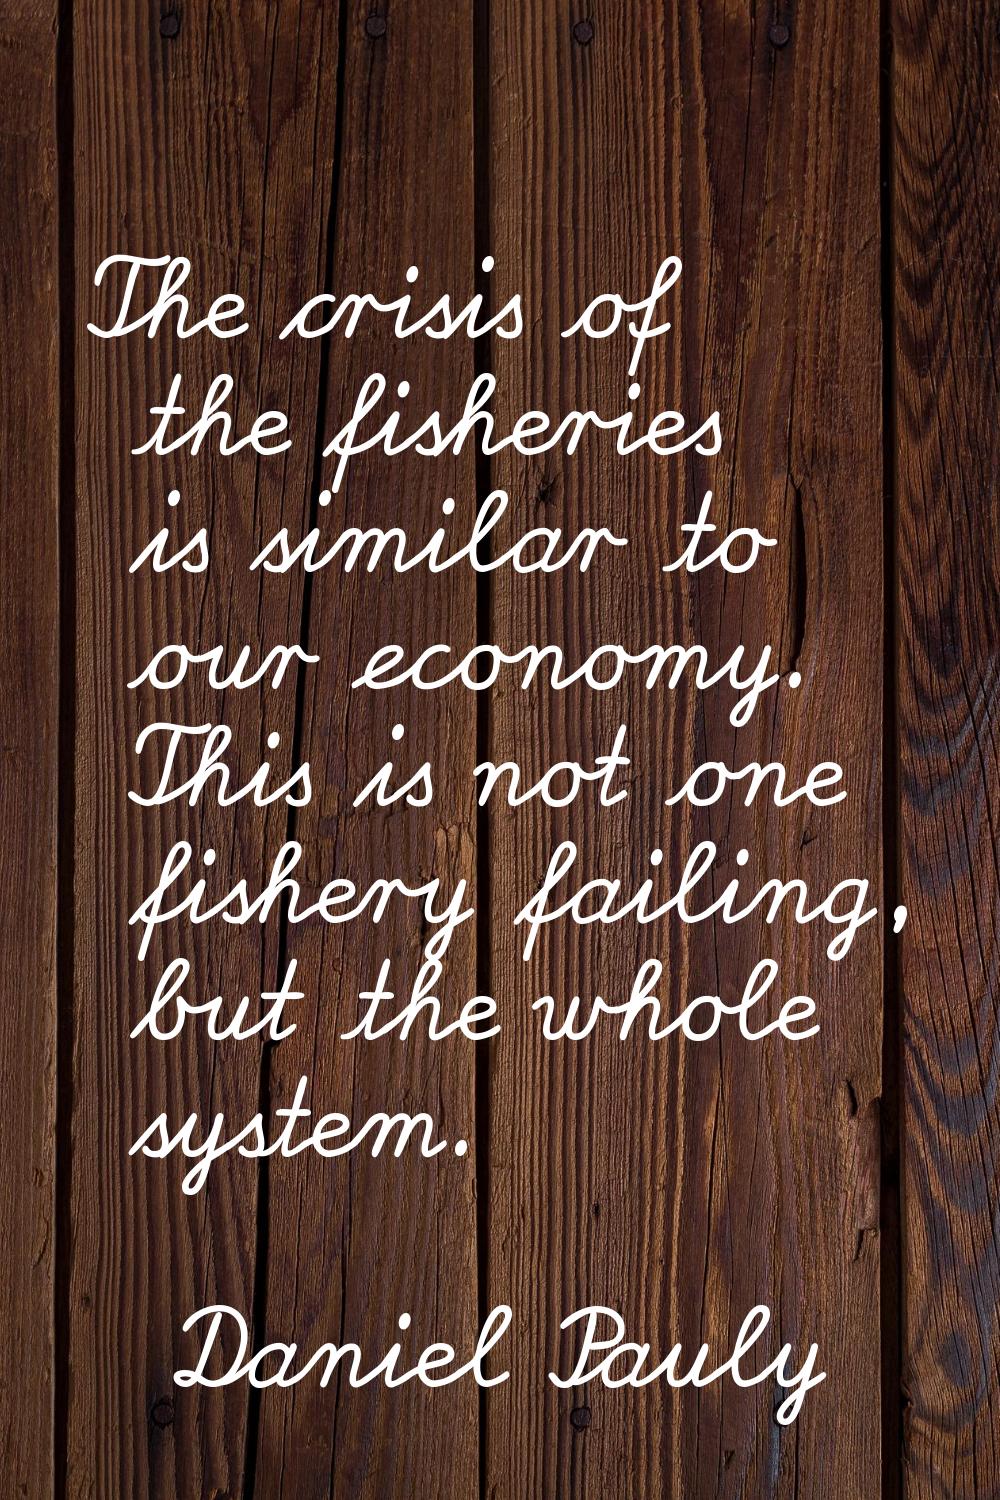 The crisis of the fisheries is similar to our economy. This is not one fishery failing, but the who